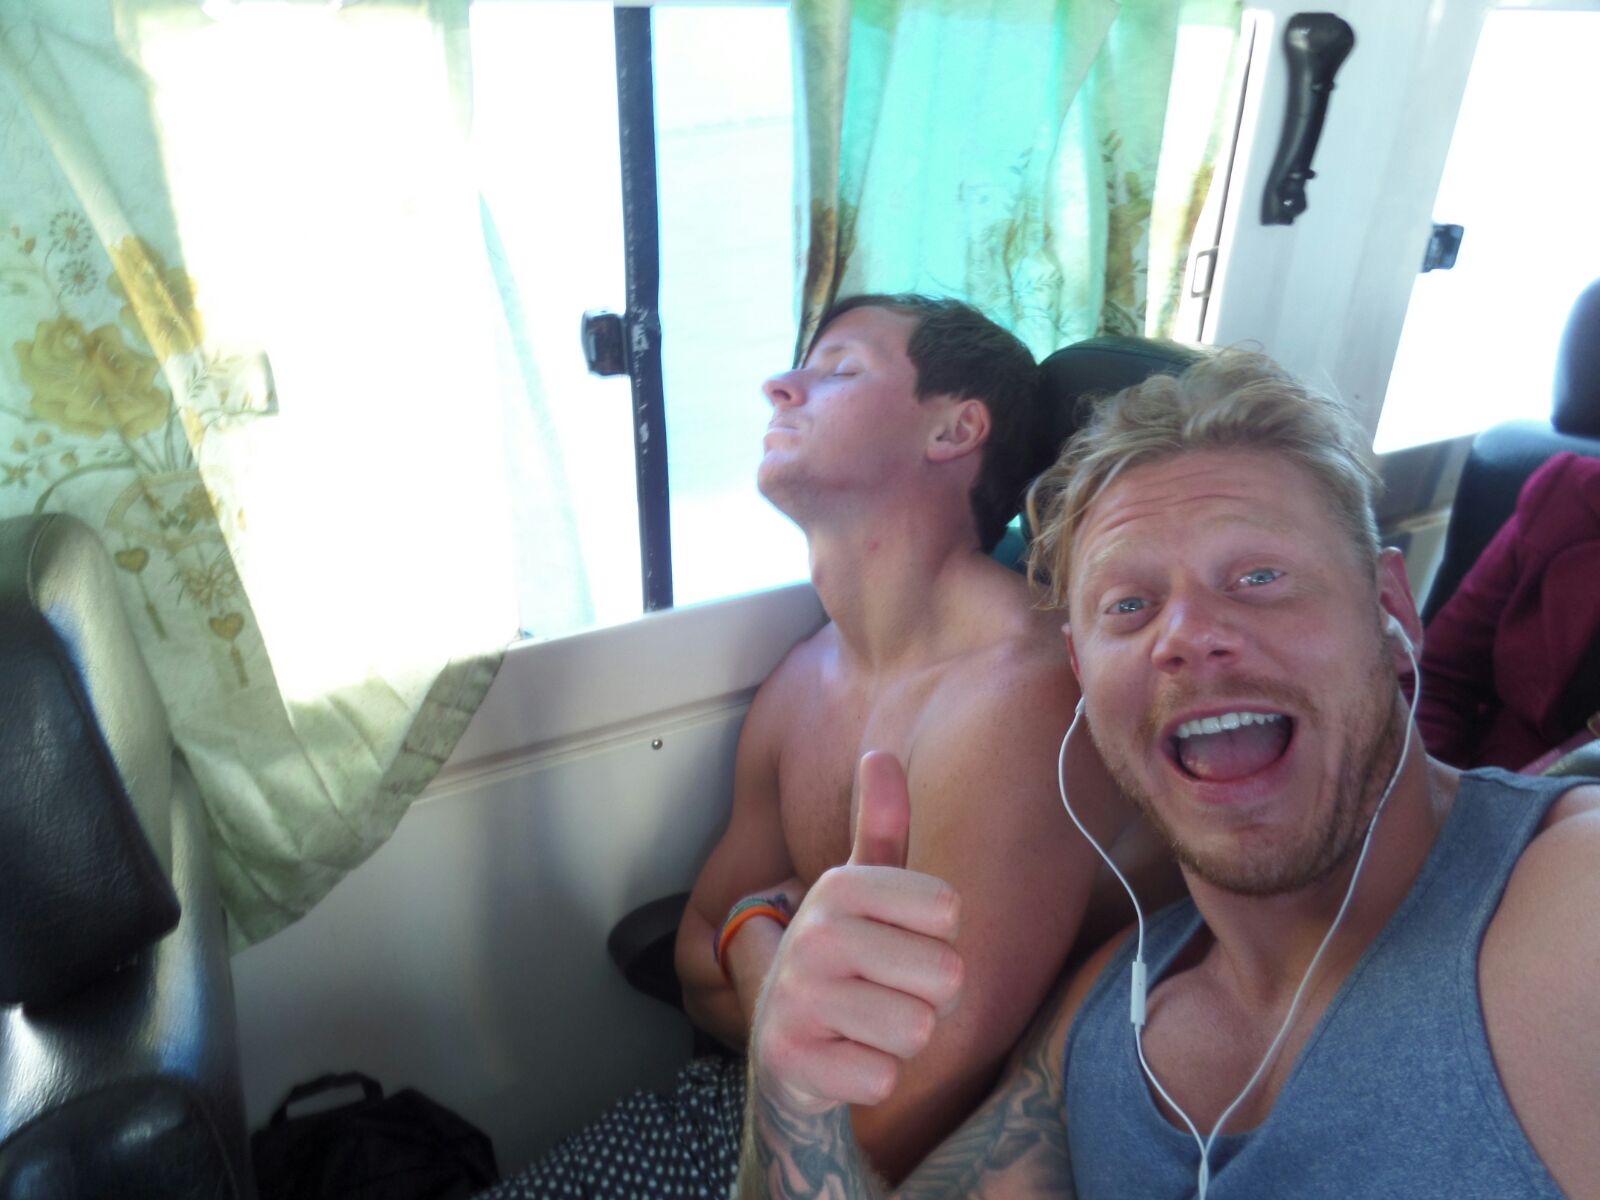 David Simpson asleep and a friend seated on a bus in Ha Long Bay, Vietnam. Wake boarding and back to Hanoi